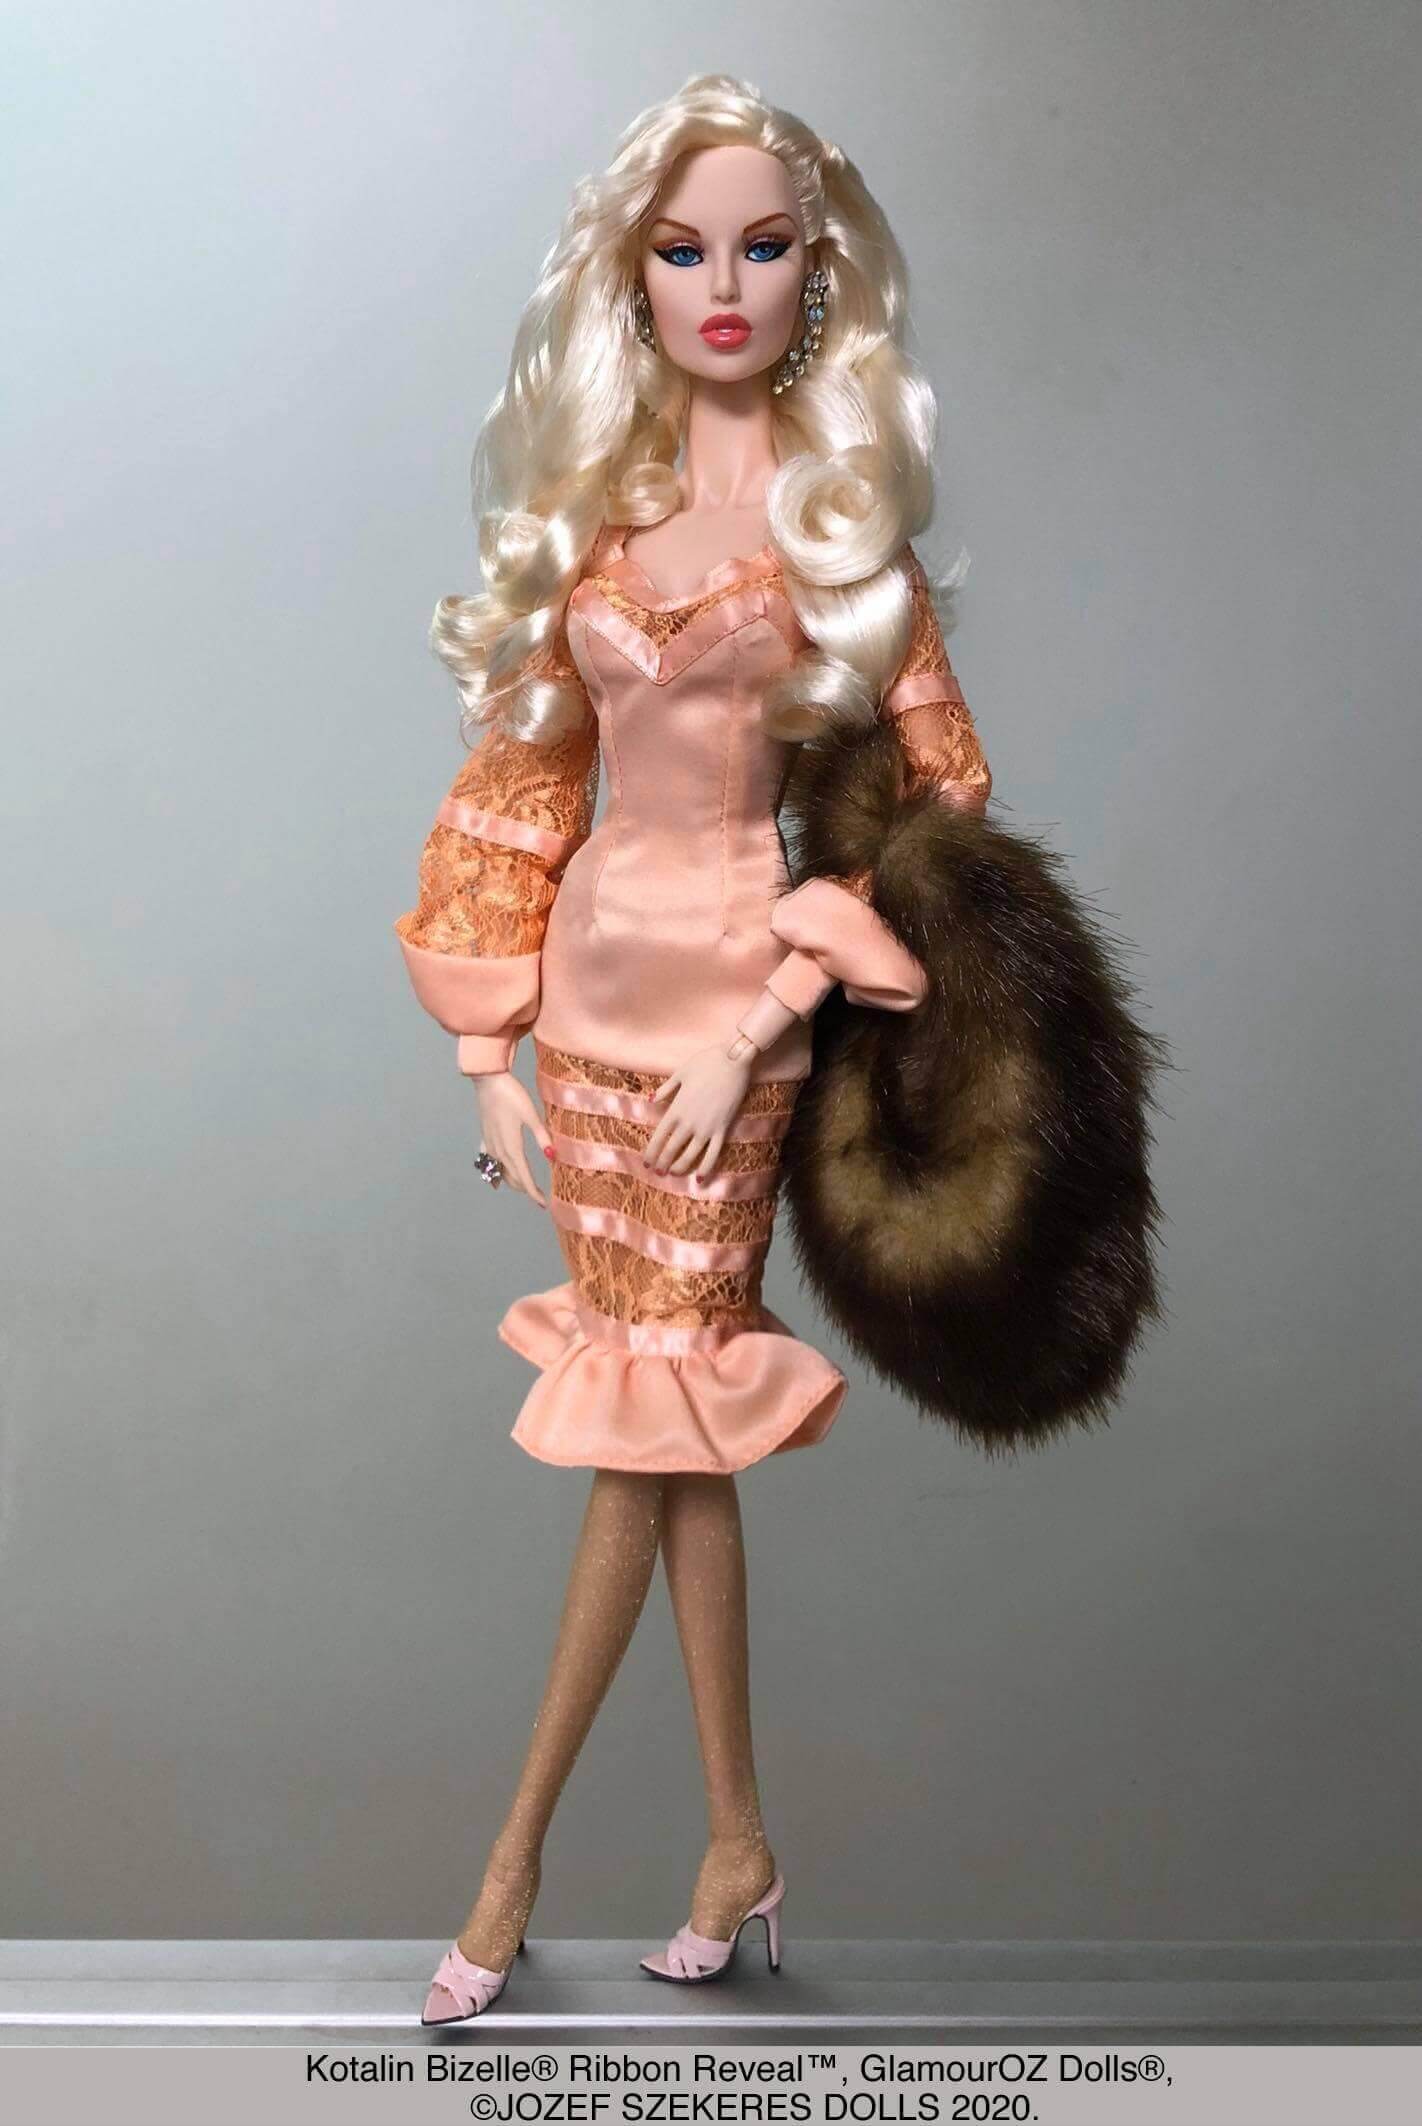 Jumella Empire - Another beautiful doll for today.. Thanks